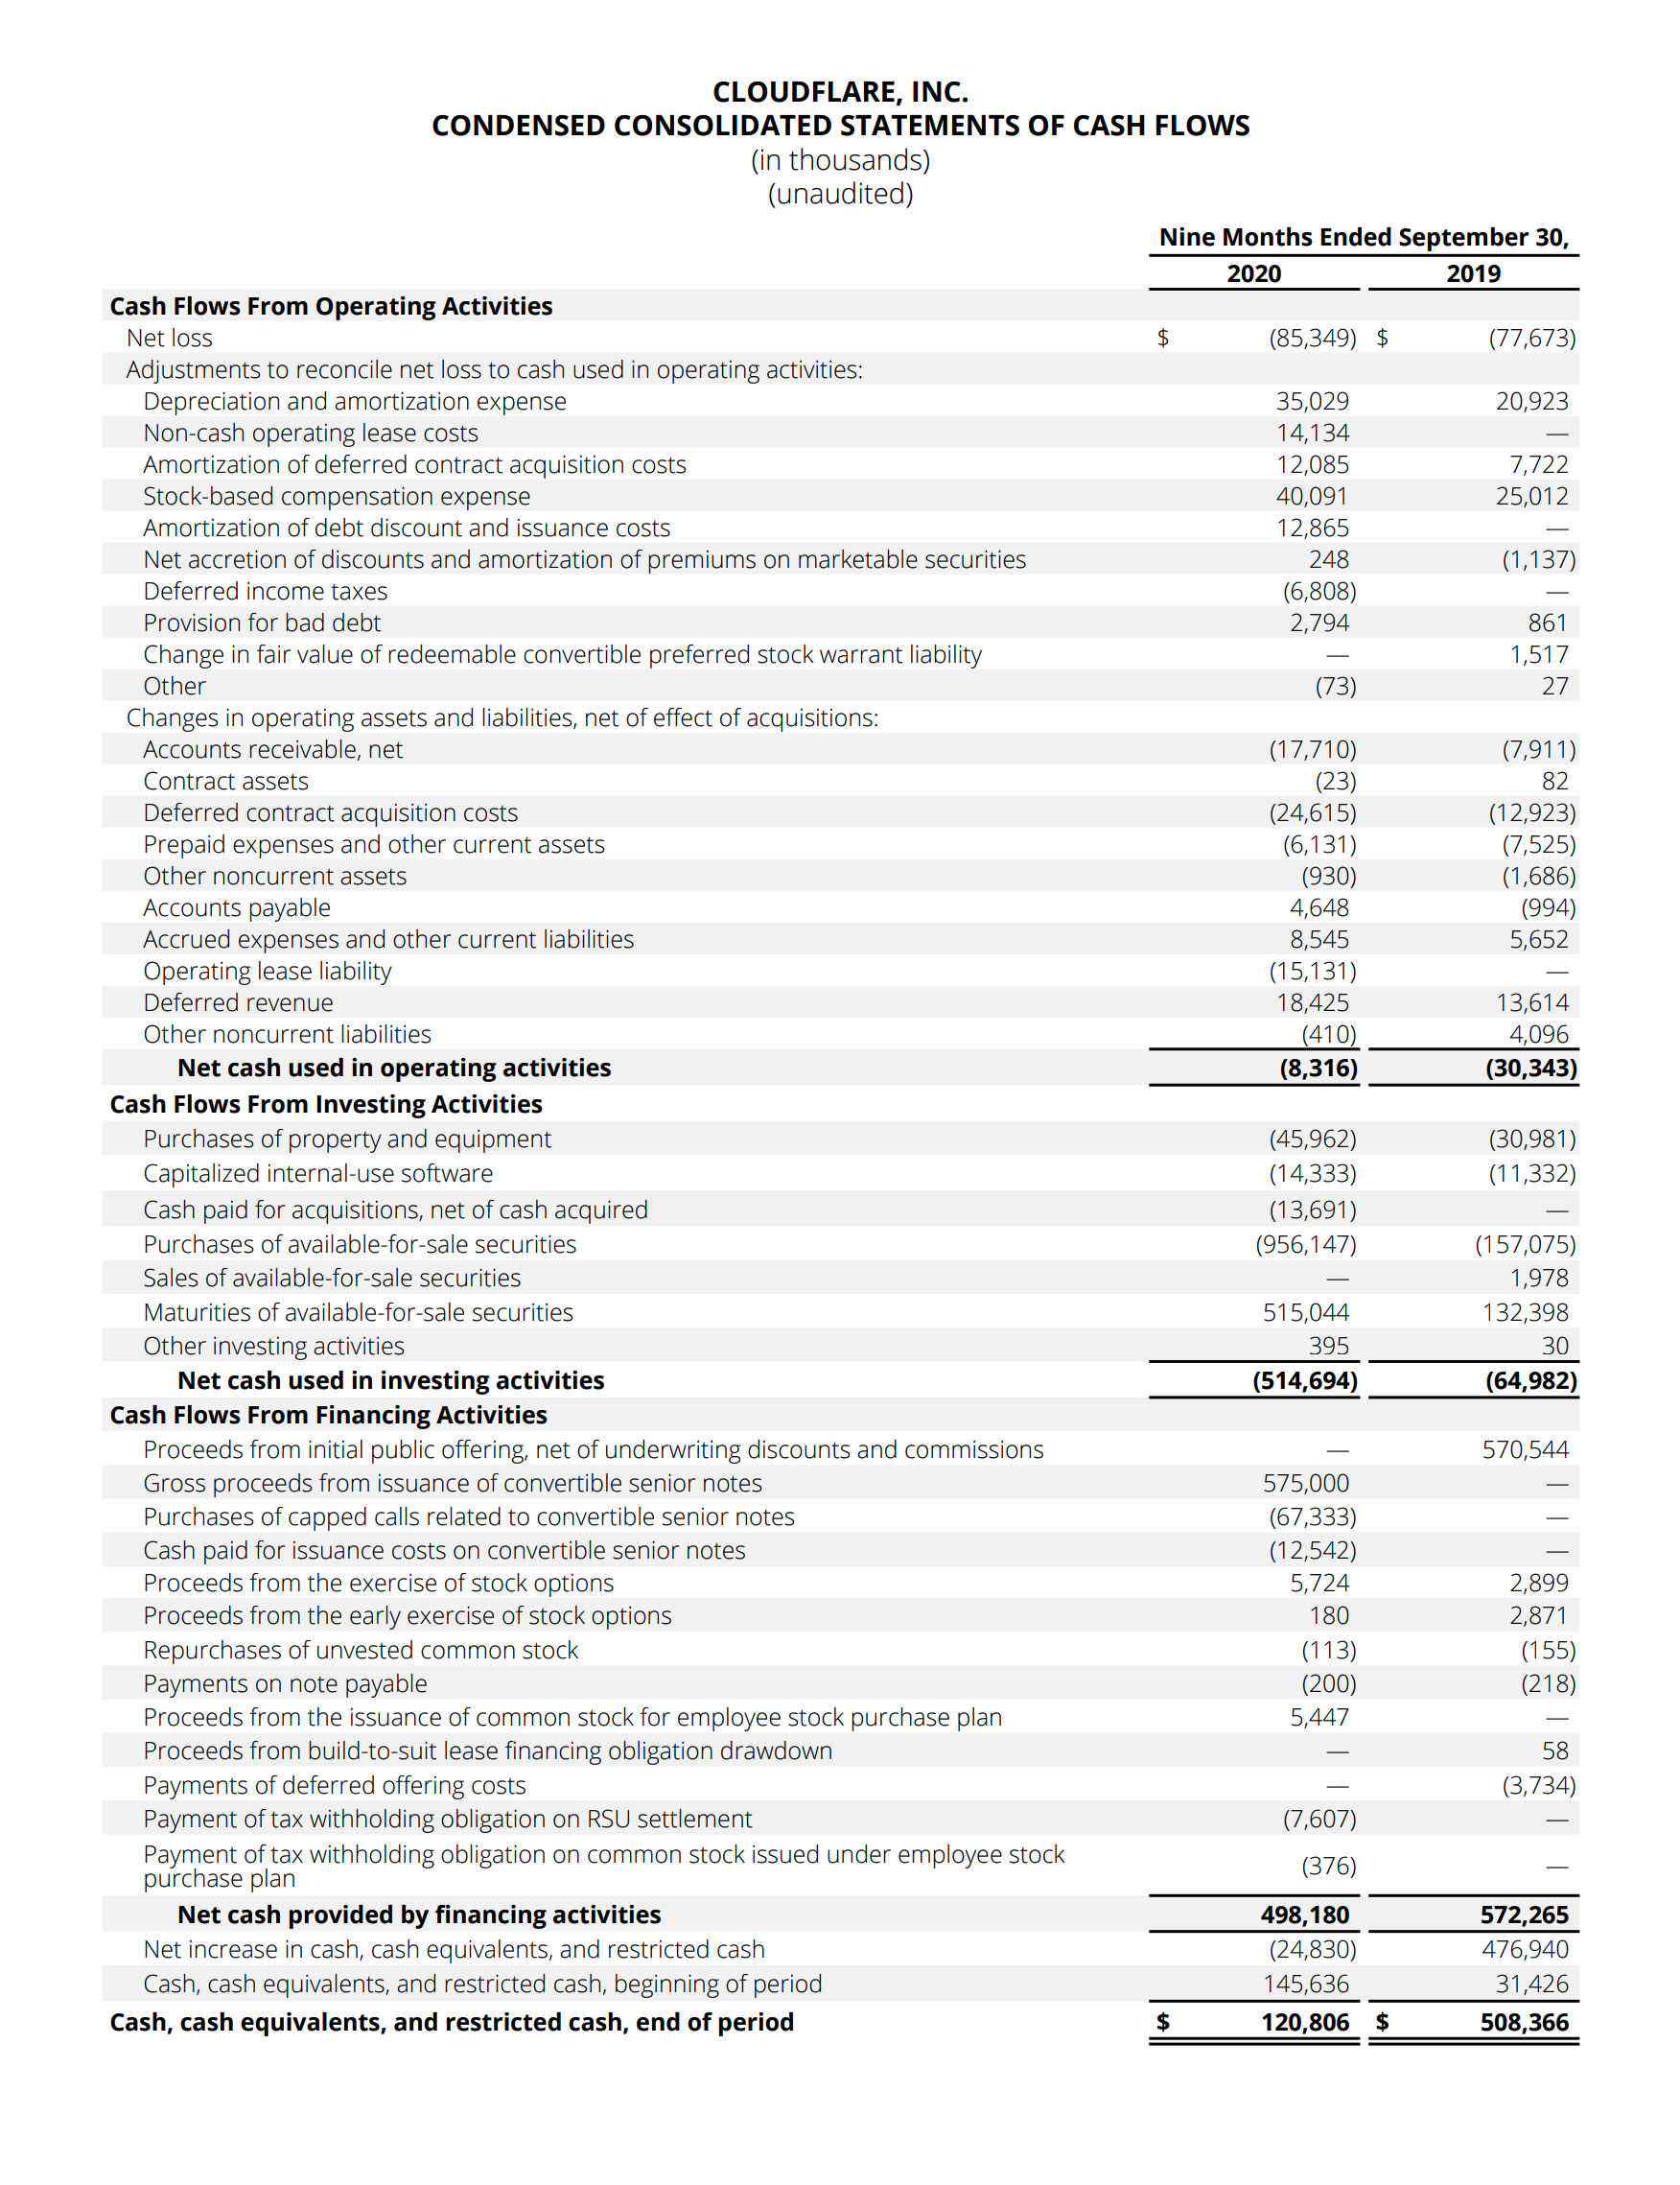 Cloudflare Inc. Condensed Consolidated Statements of Cash Flows